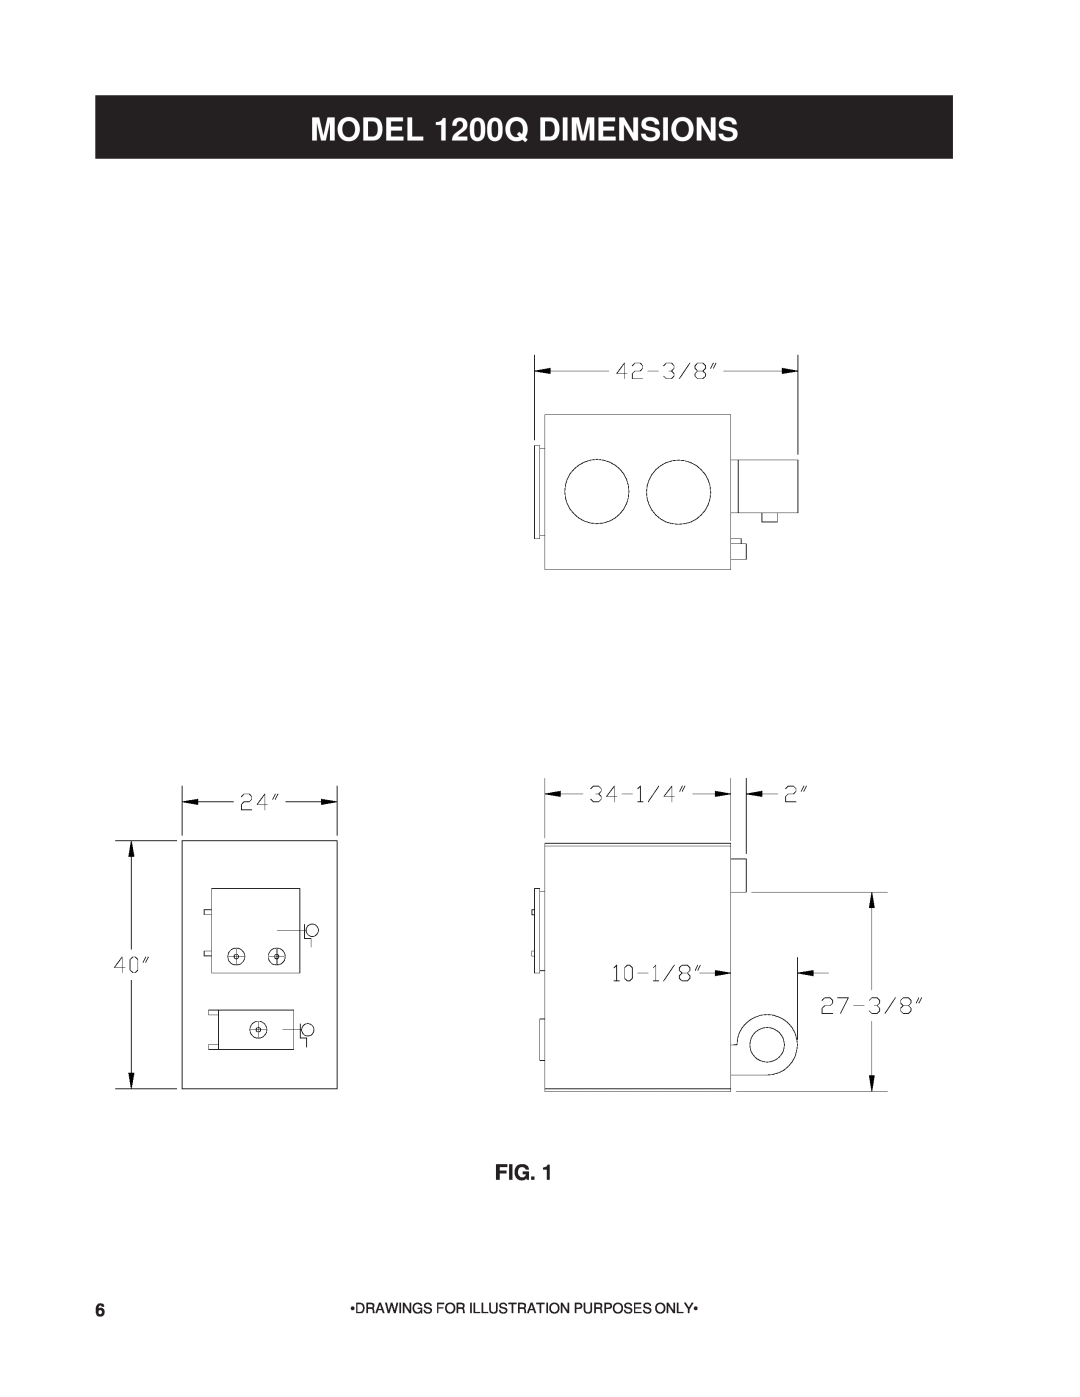 United States Stove owner manual MODEL 1200Q DIMENSIONS, •Drawings For Illustration Purposes Only• 